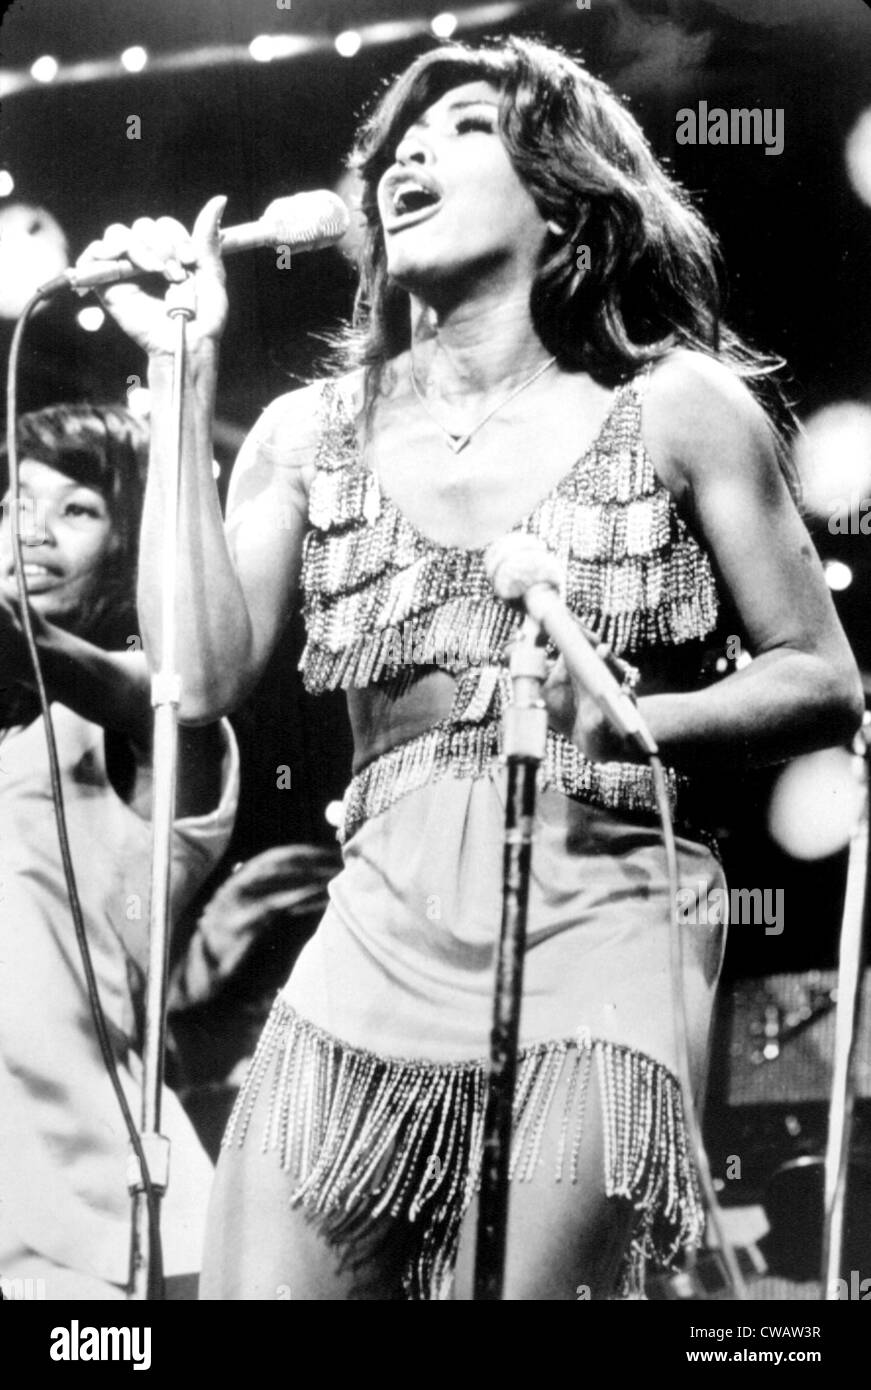 Tina turner 1970s portraits hi-res stock photography and images - Alamy